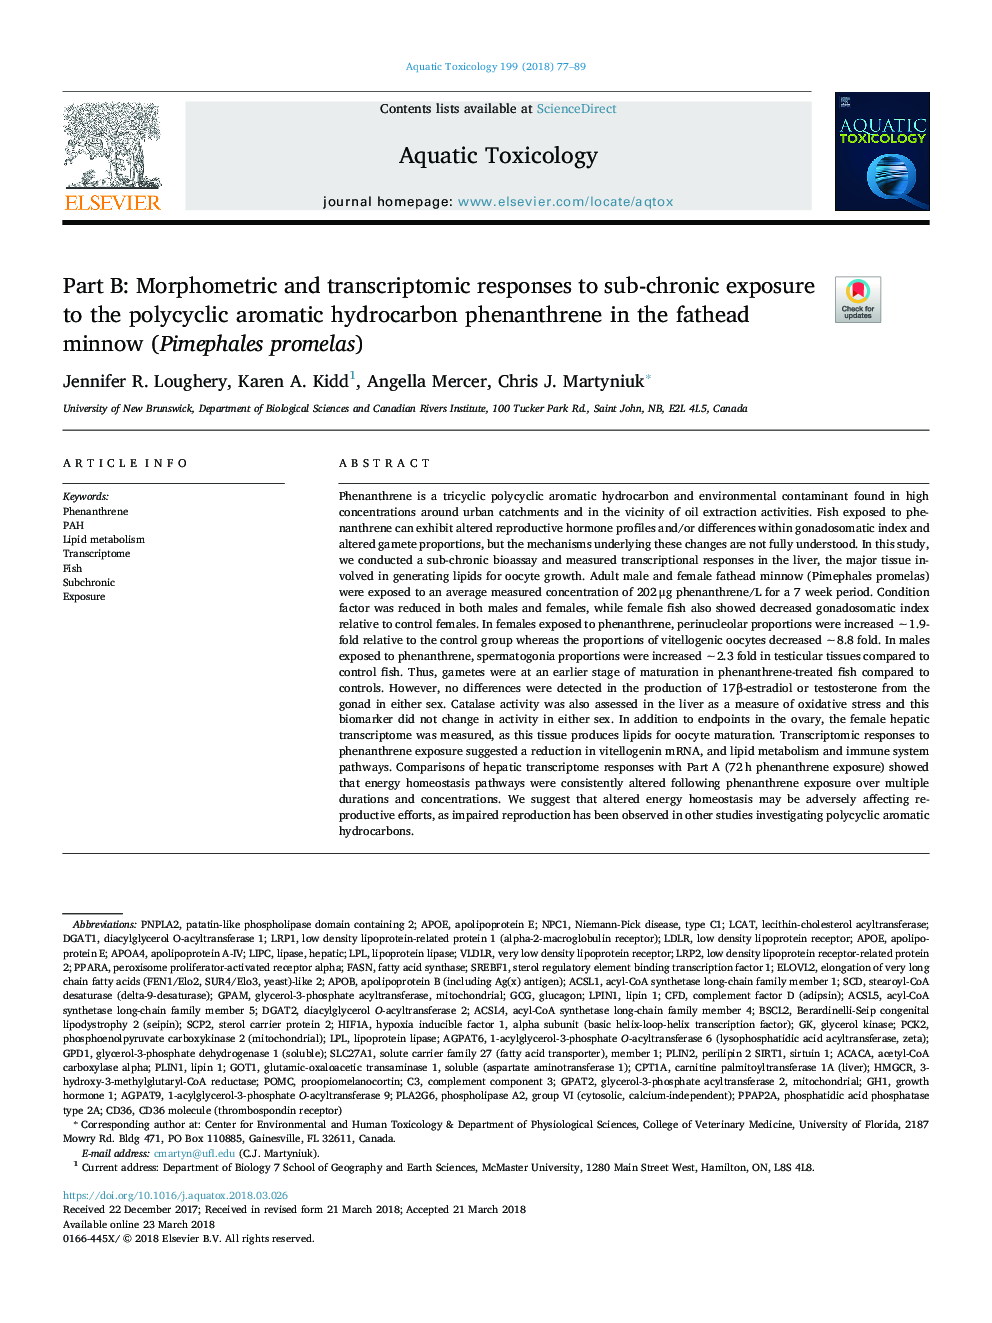 Part B: Morphometric and transcriptomic responses to sub-chronic exposure to the polycyclic aromatic hydrocarbon phenanthrene in the fathead minnow (Pimephales promelas)